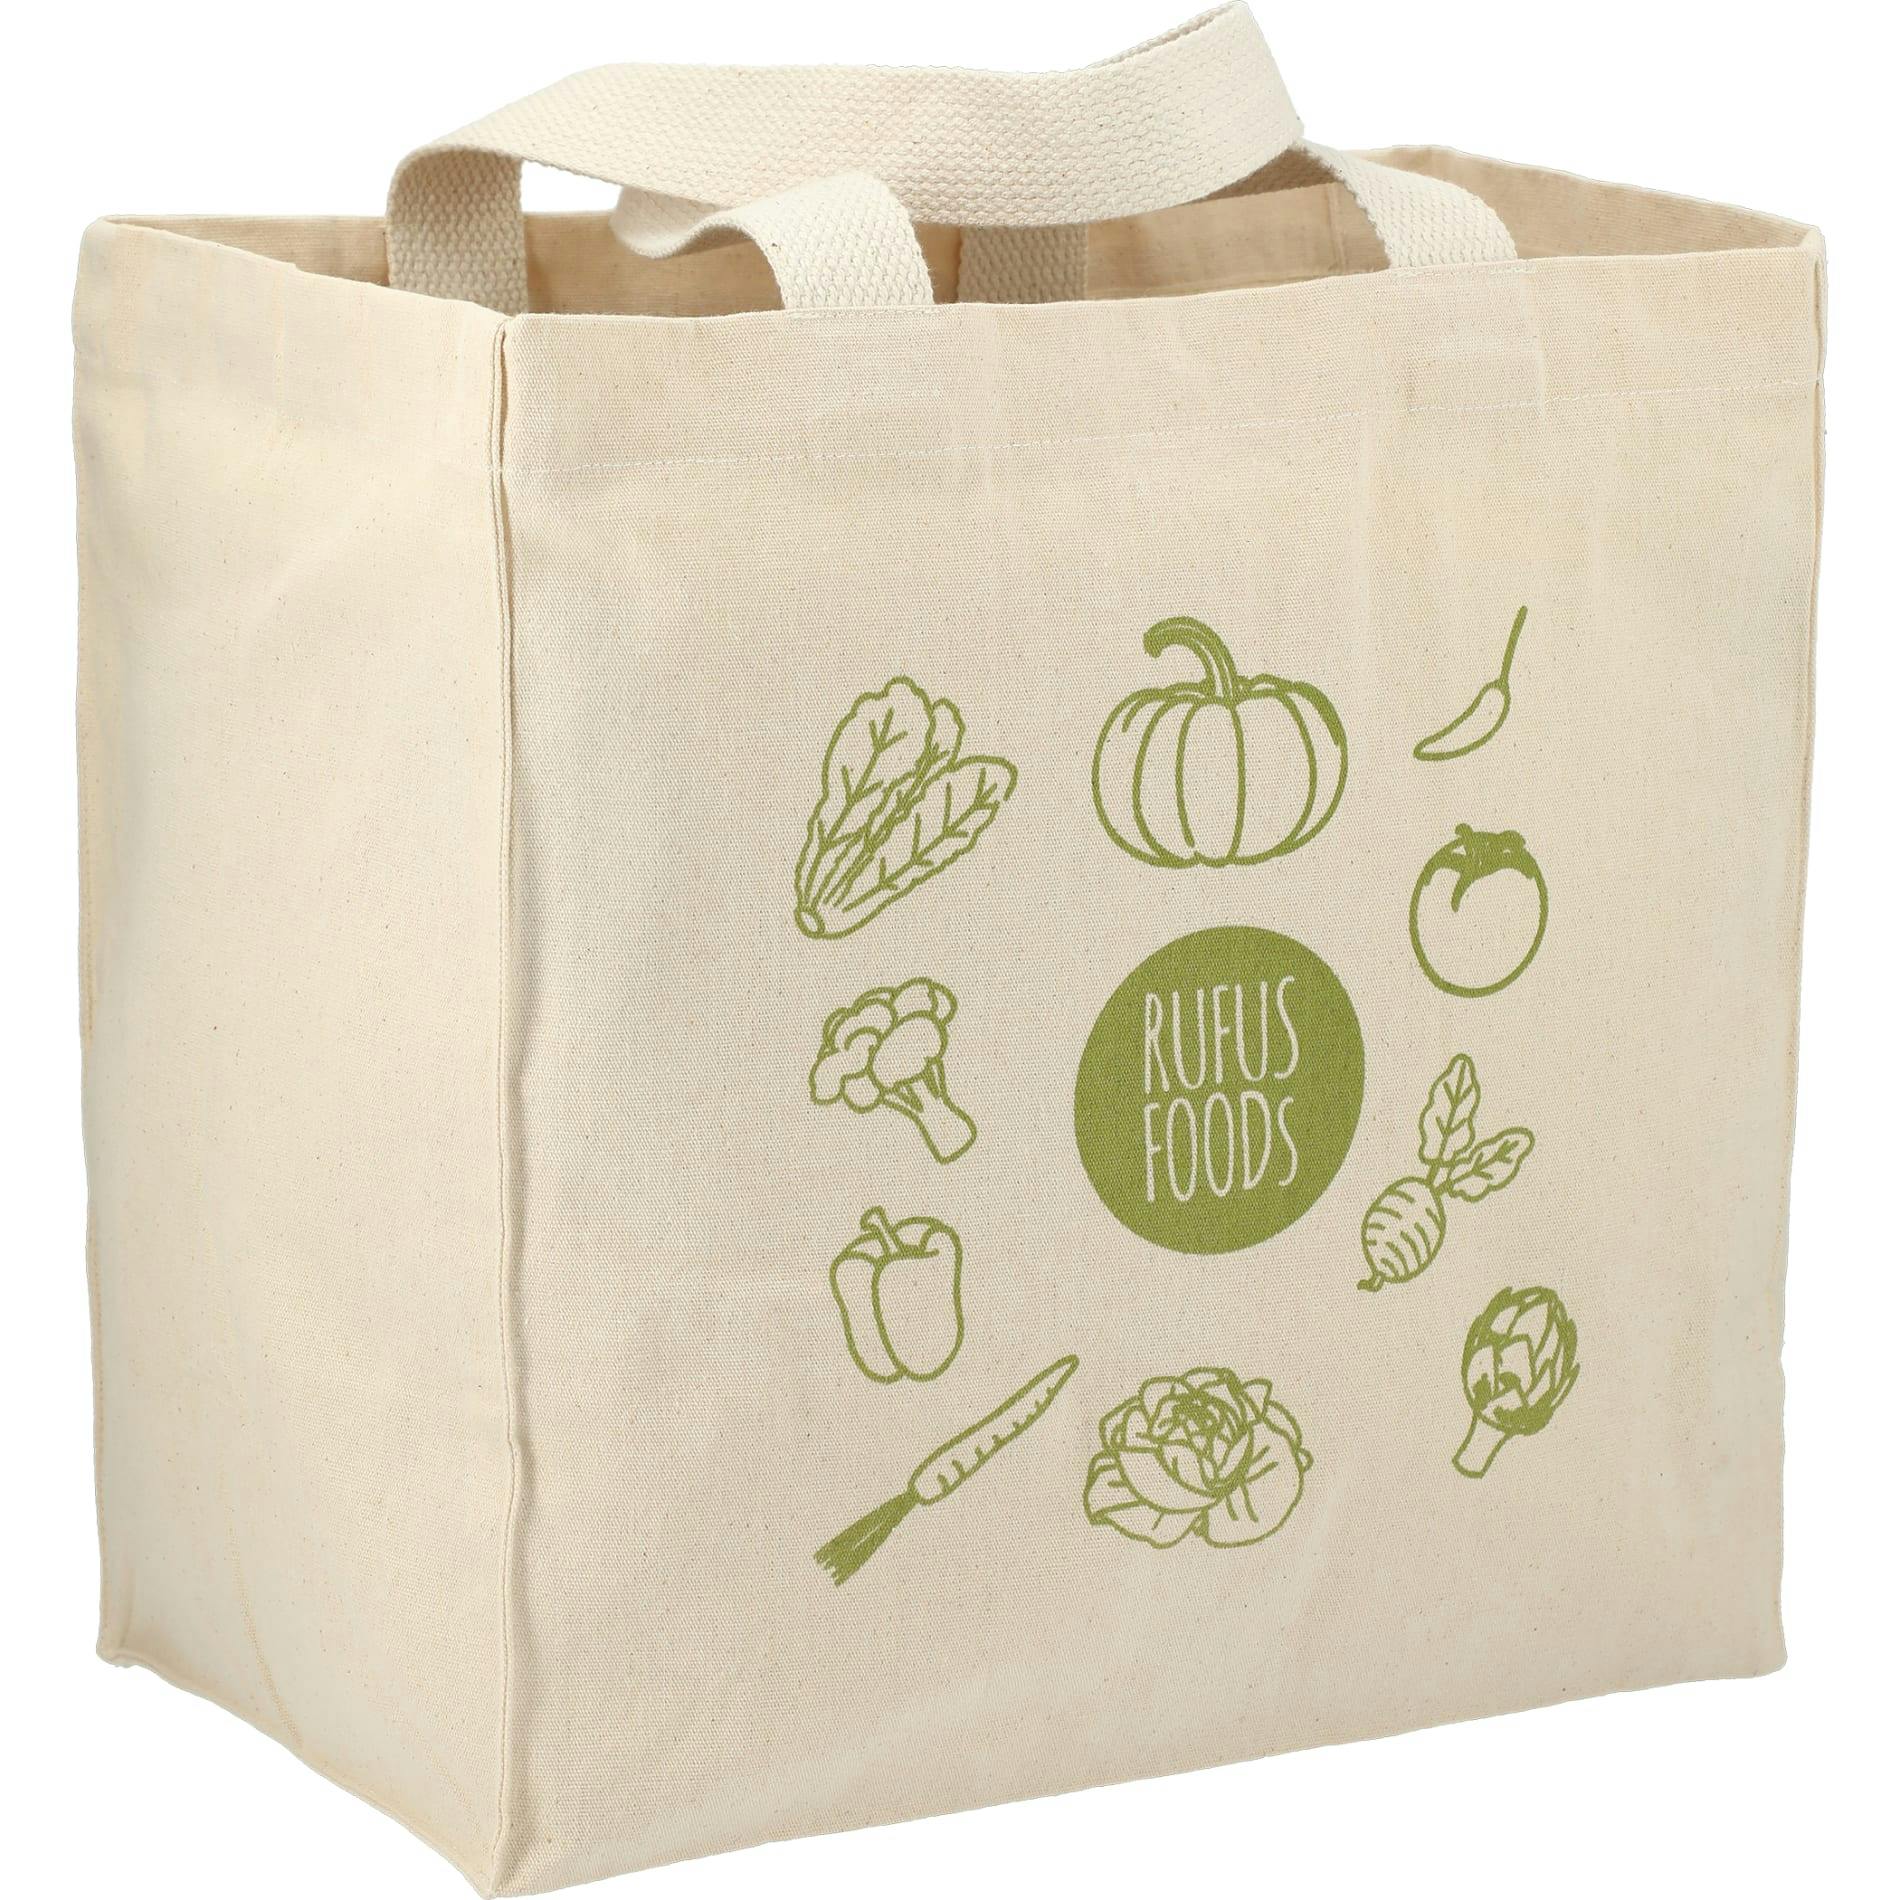 Essential 8oz Cotton Grocery Tote - additional Image 1